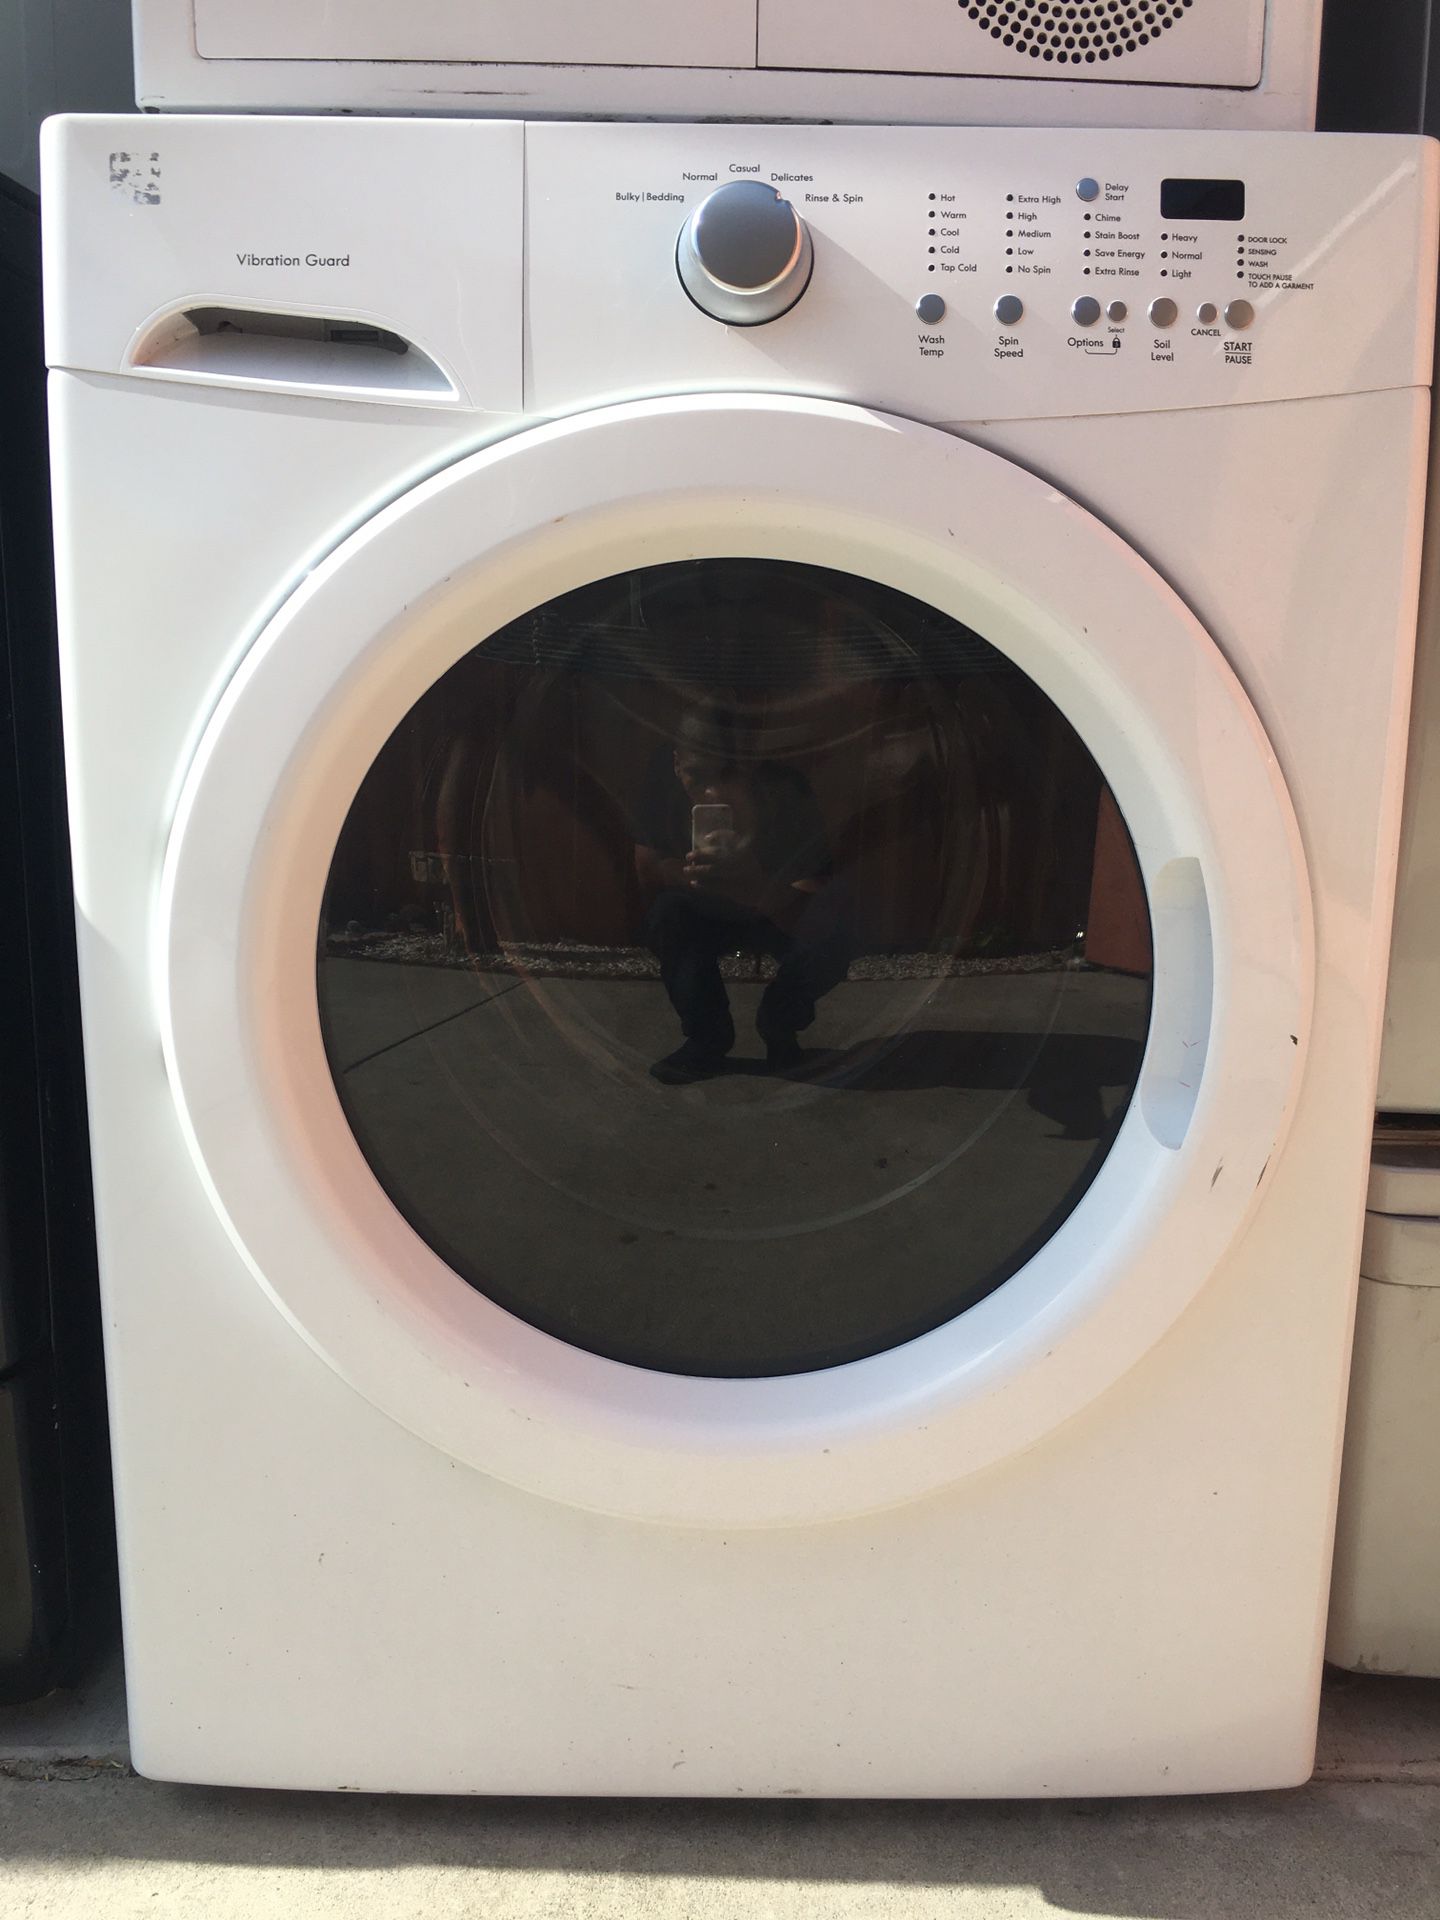 Kenmore Electric Washer